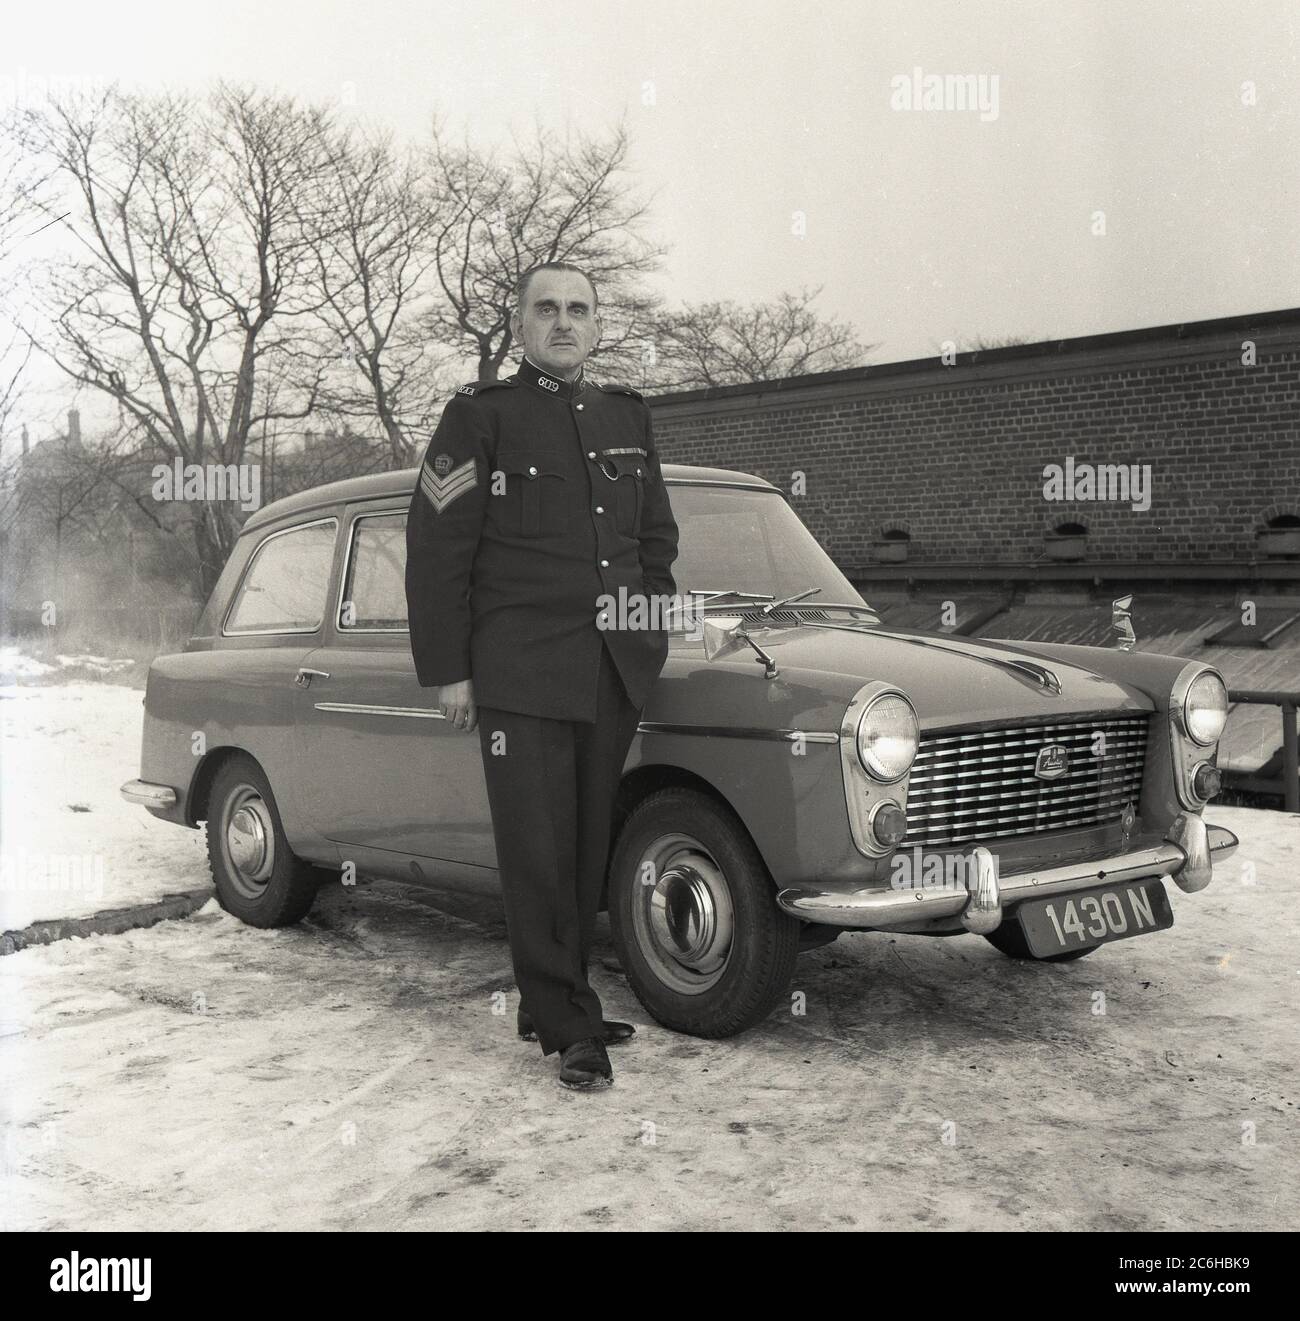 1960s, historial, wintertime and with snow on the ground outside, a Sergeant of the Royal Artillery in his uniform standing for a photo by his Austin A40 car, England, UK. Founded in 1716, the Royal Regiment of Artillery, known as 'The Gunners', is one of two regiments that make up the arttillery arm of the British Army. Stock Photo